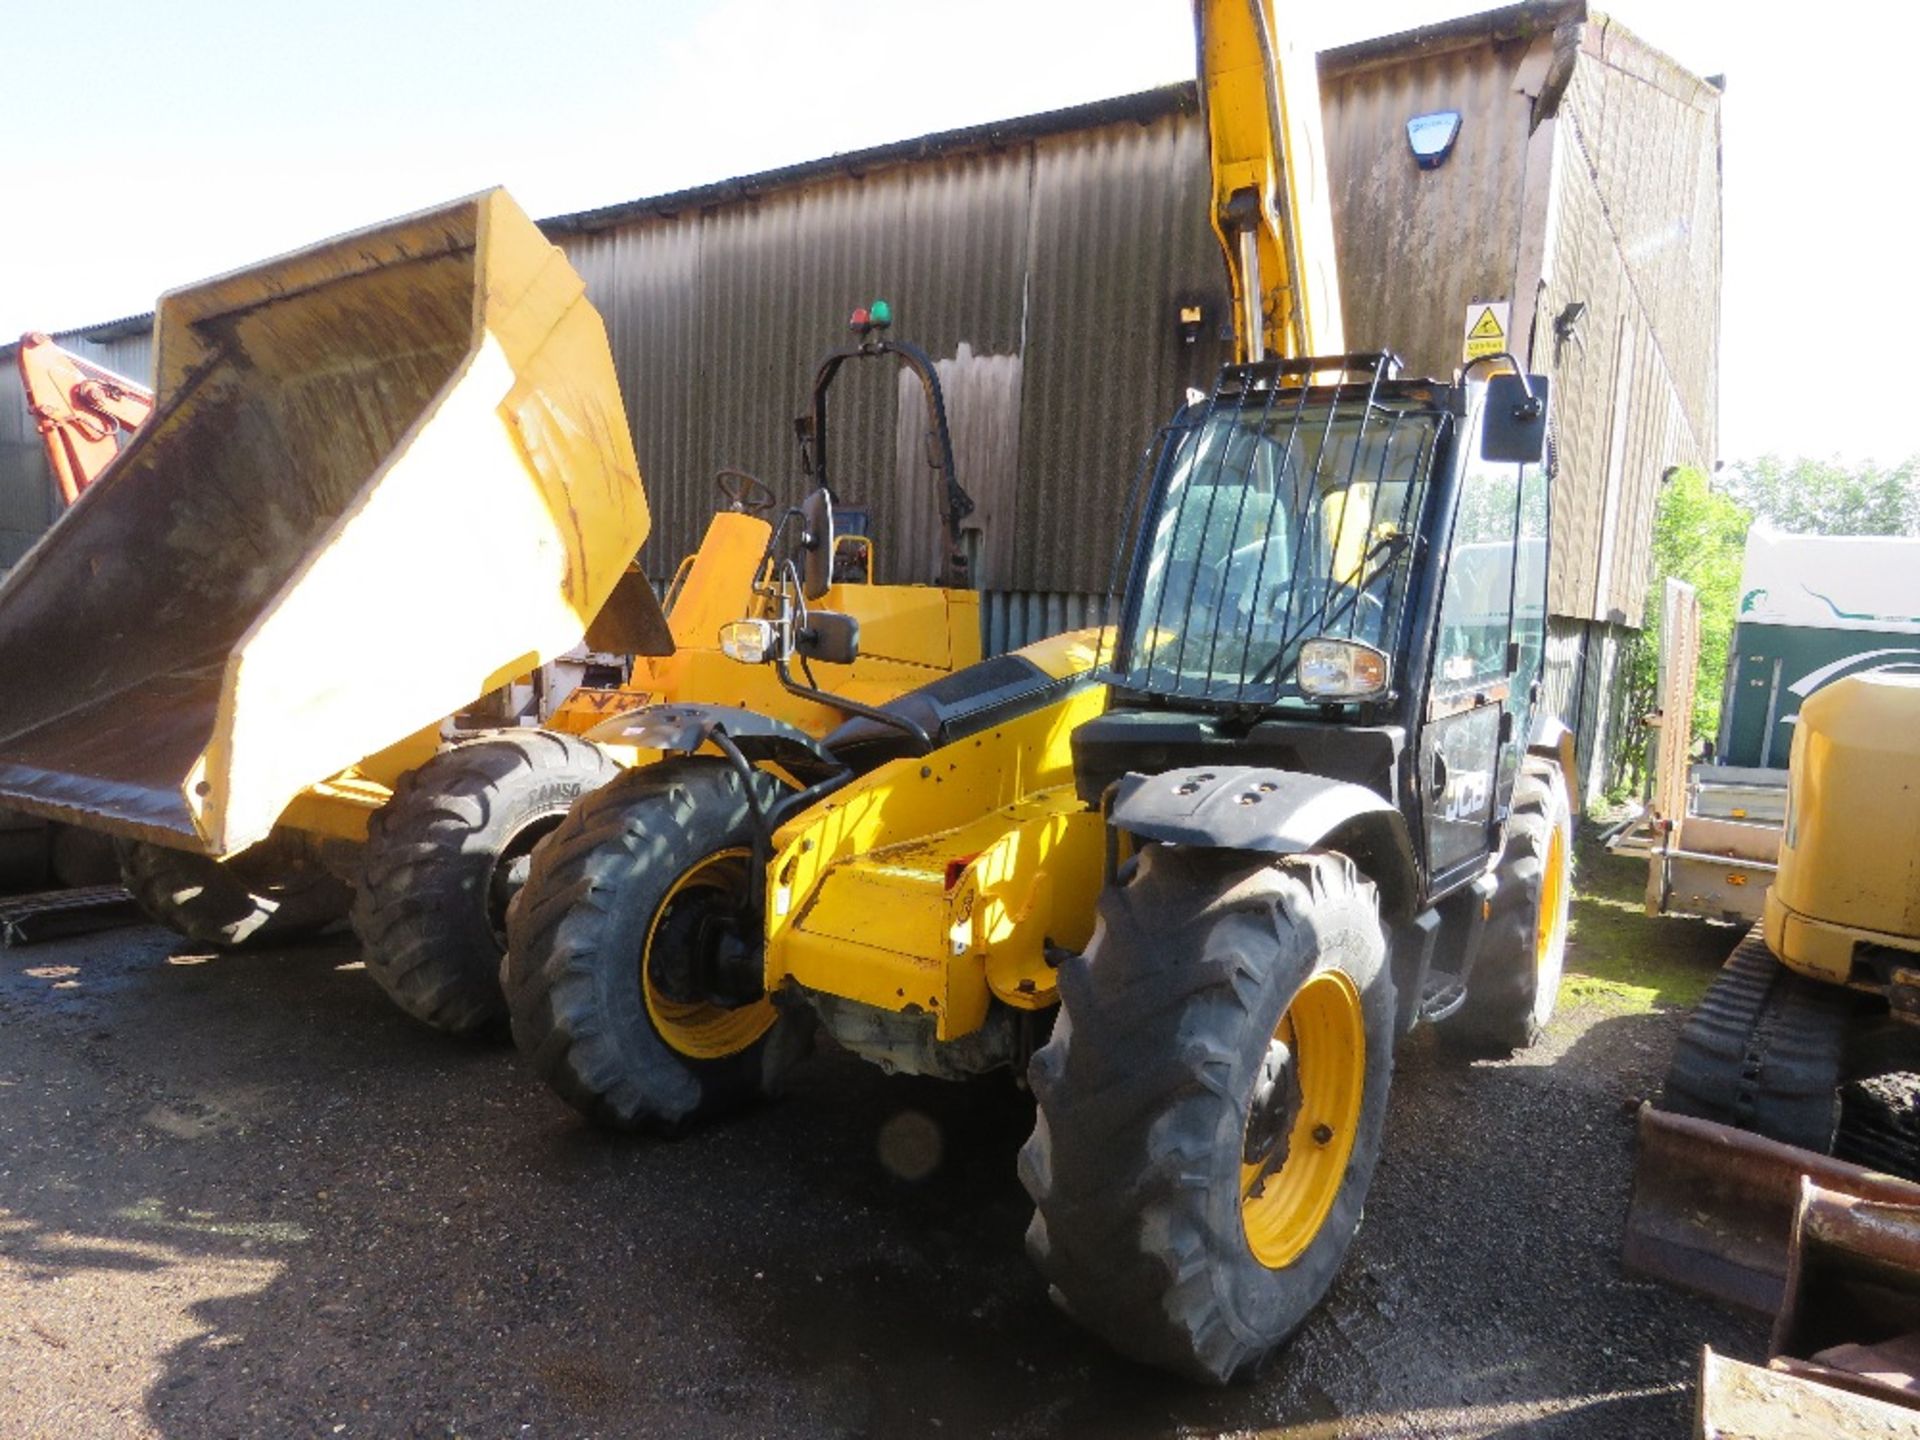 JCB 535-95 TELEHANDLER, YEAR 2015 REG: RV65 XRU. V5 TO FOLLOW ONCE SOLD. OWNED BY VENDOR FROM NEW.